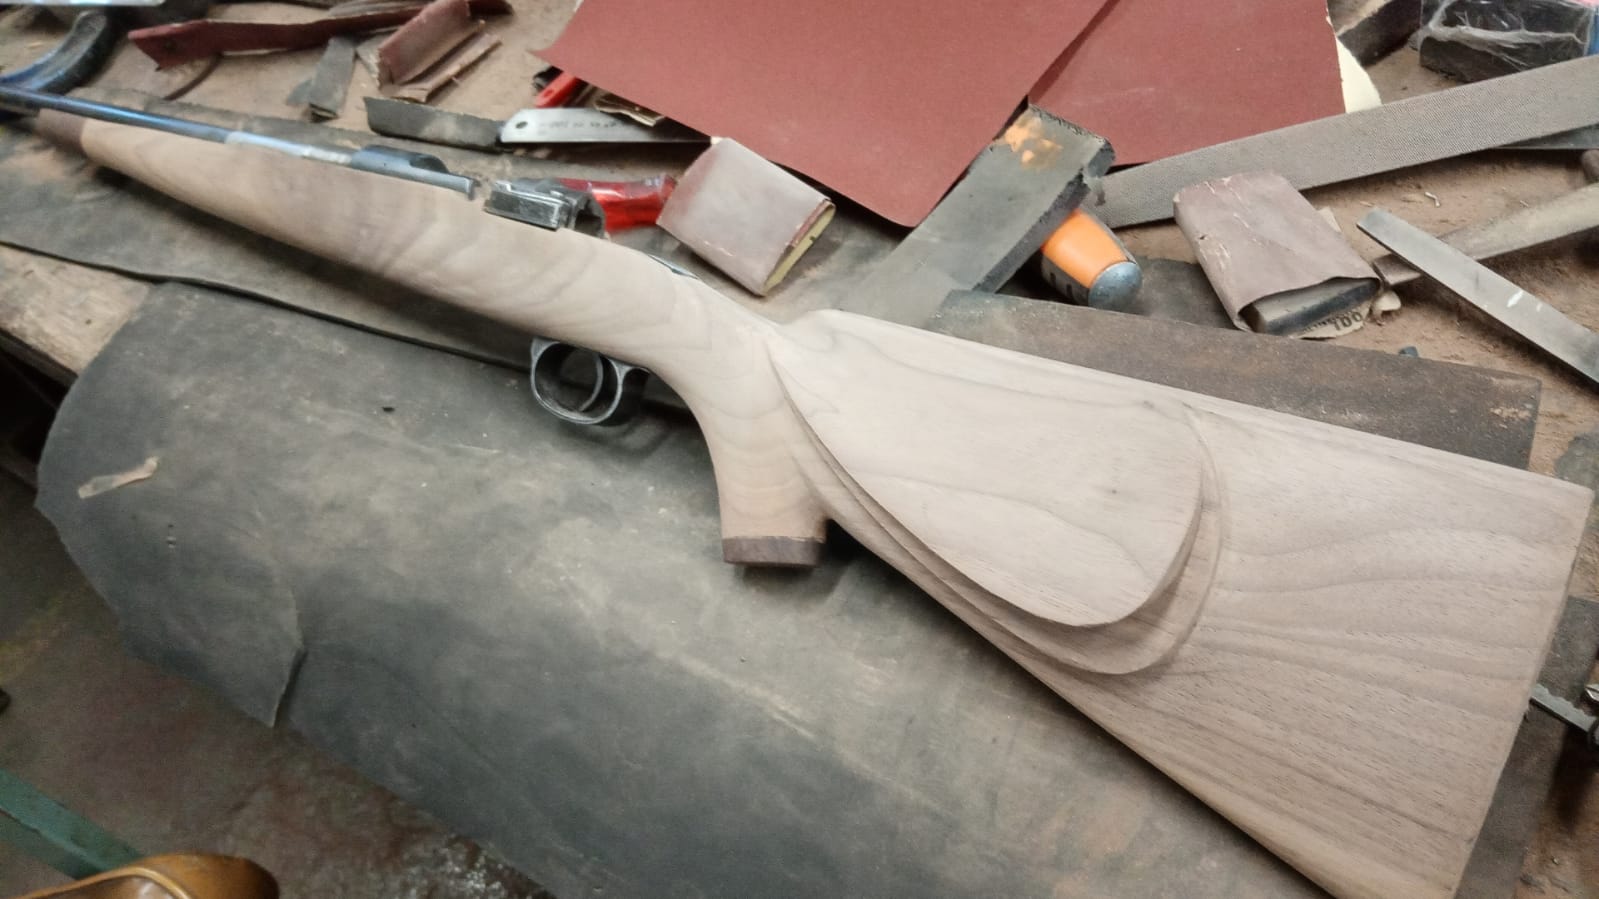 Cleaning up the butt stock and cheek piece...the stock is way too long but will be cut to size...jpg